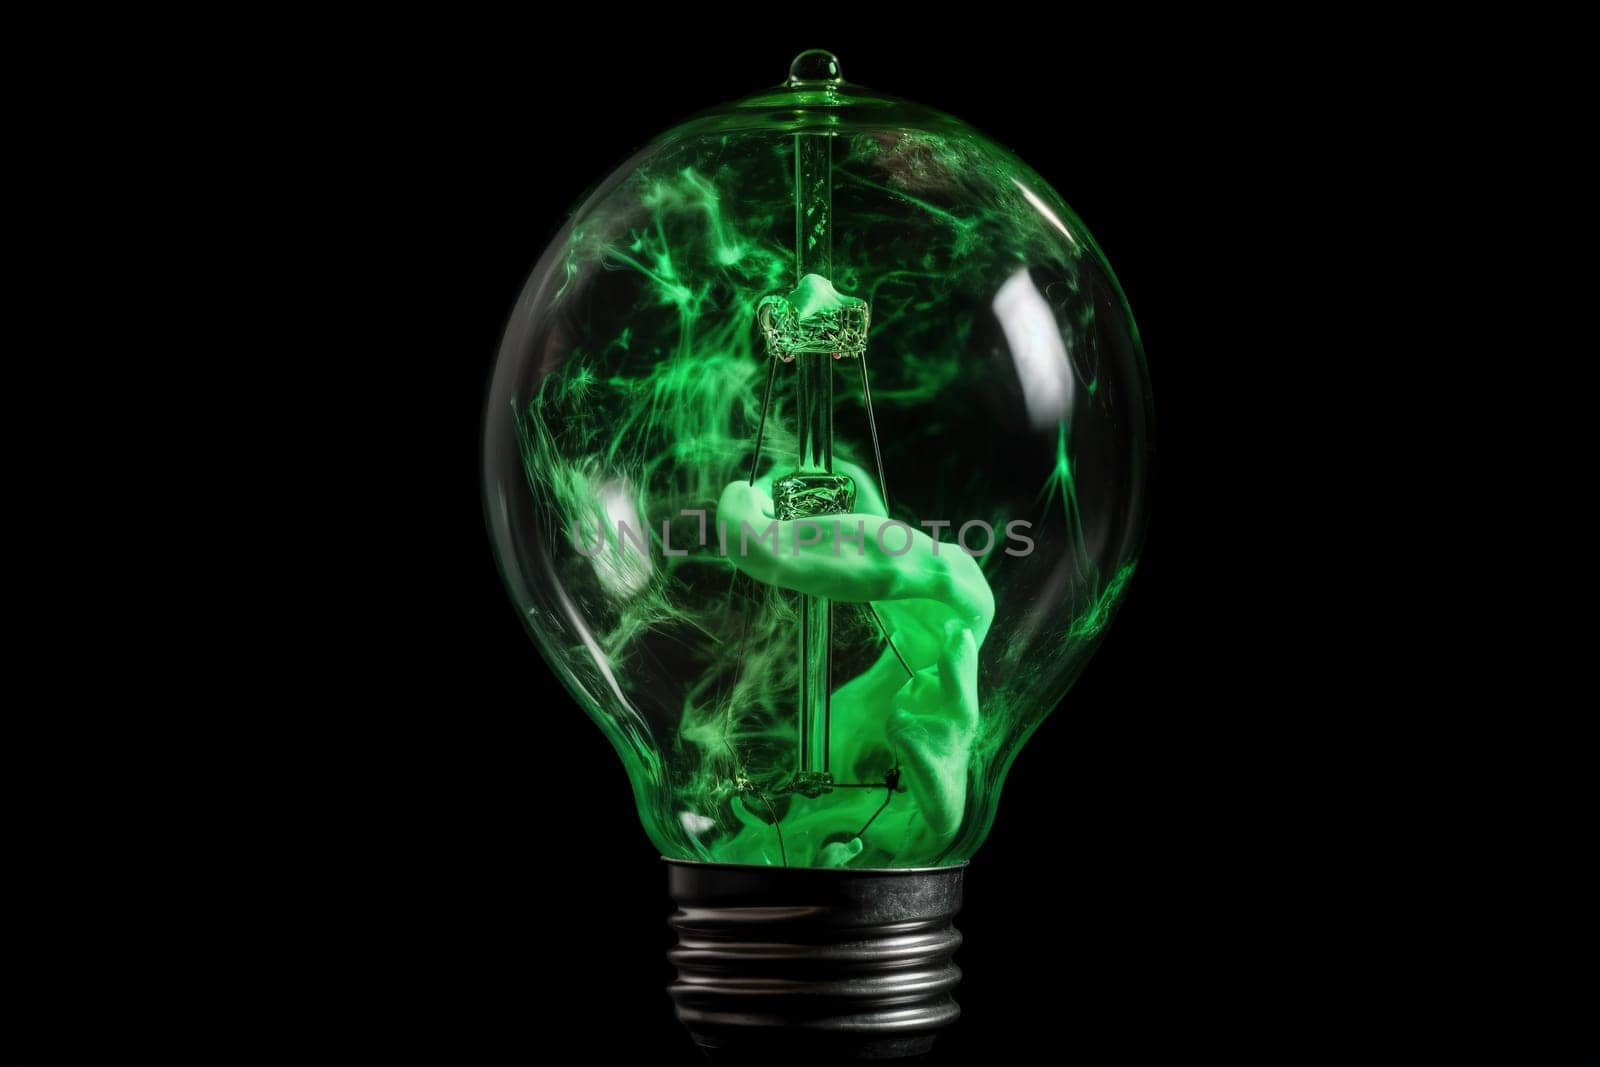 Electric Bulb With Green Smoke Inside On Black Background, Concept Of Ecological Problems Of Our Planet by GekaSkr